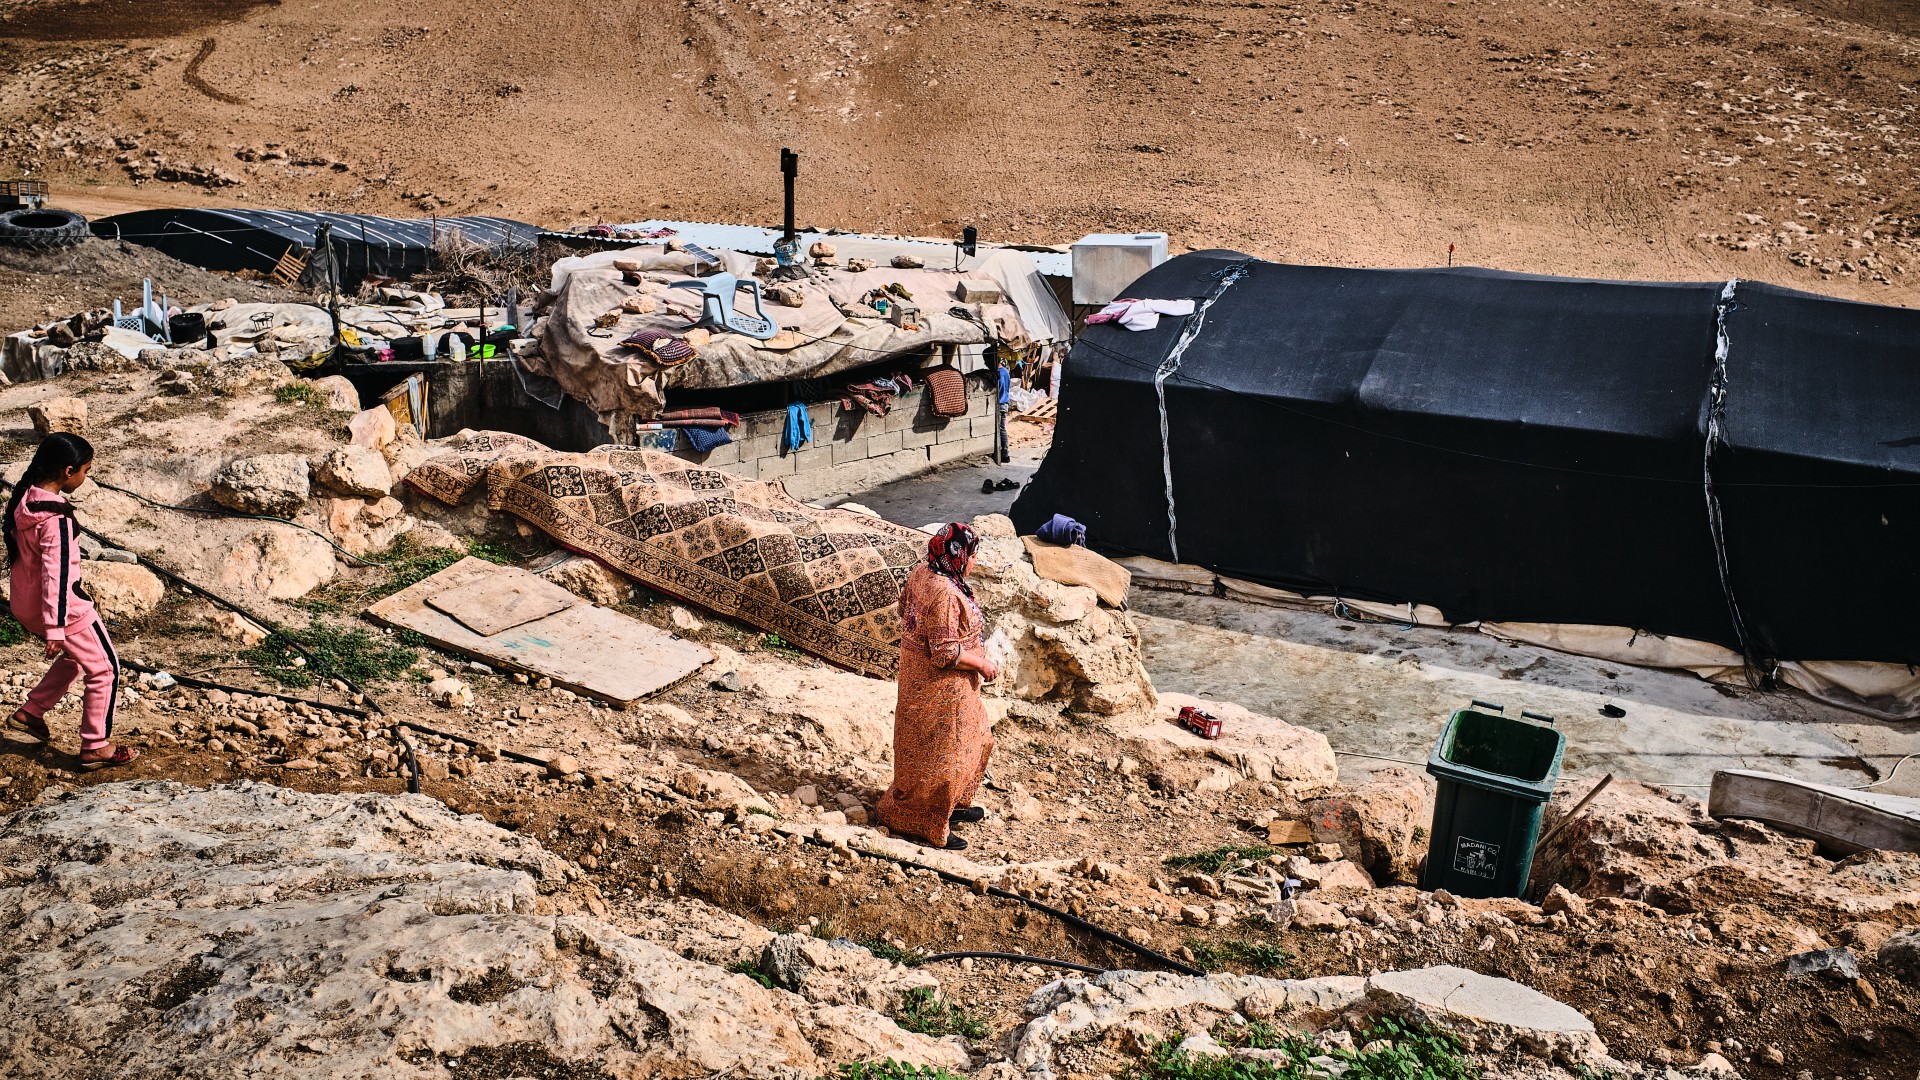 About 545 Palestinians have been forcibly displaced from at least 13 communities since 7 October in Area C in the occupied West Bank (MEE/Angelo Calianno)